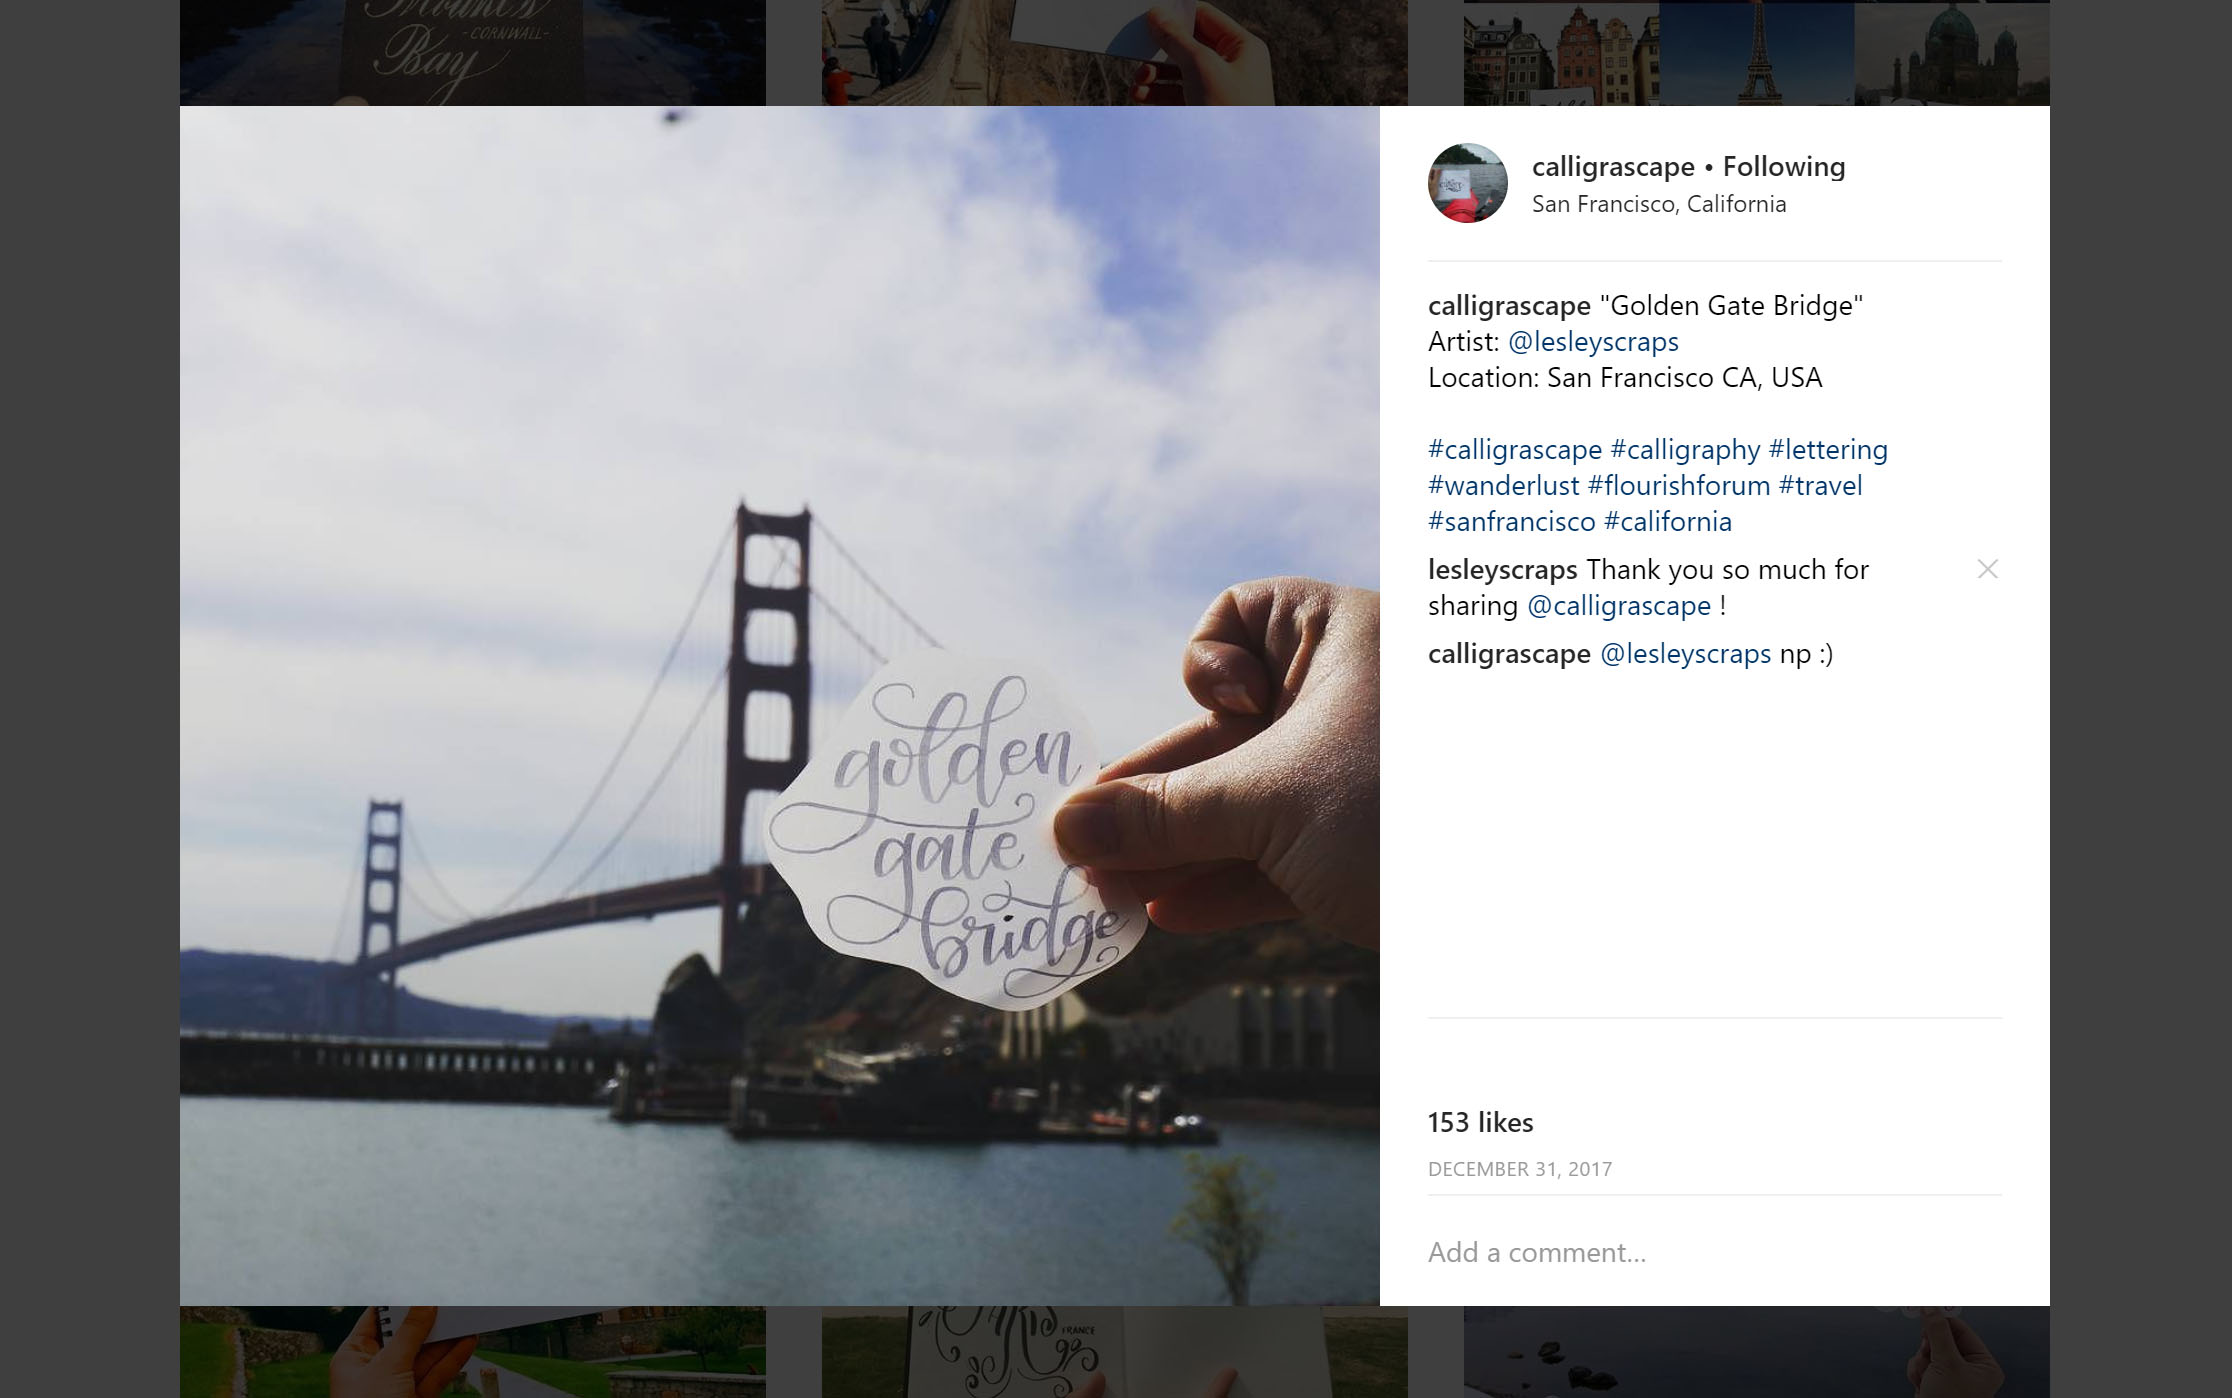 Featured on Calligrascape